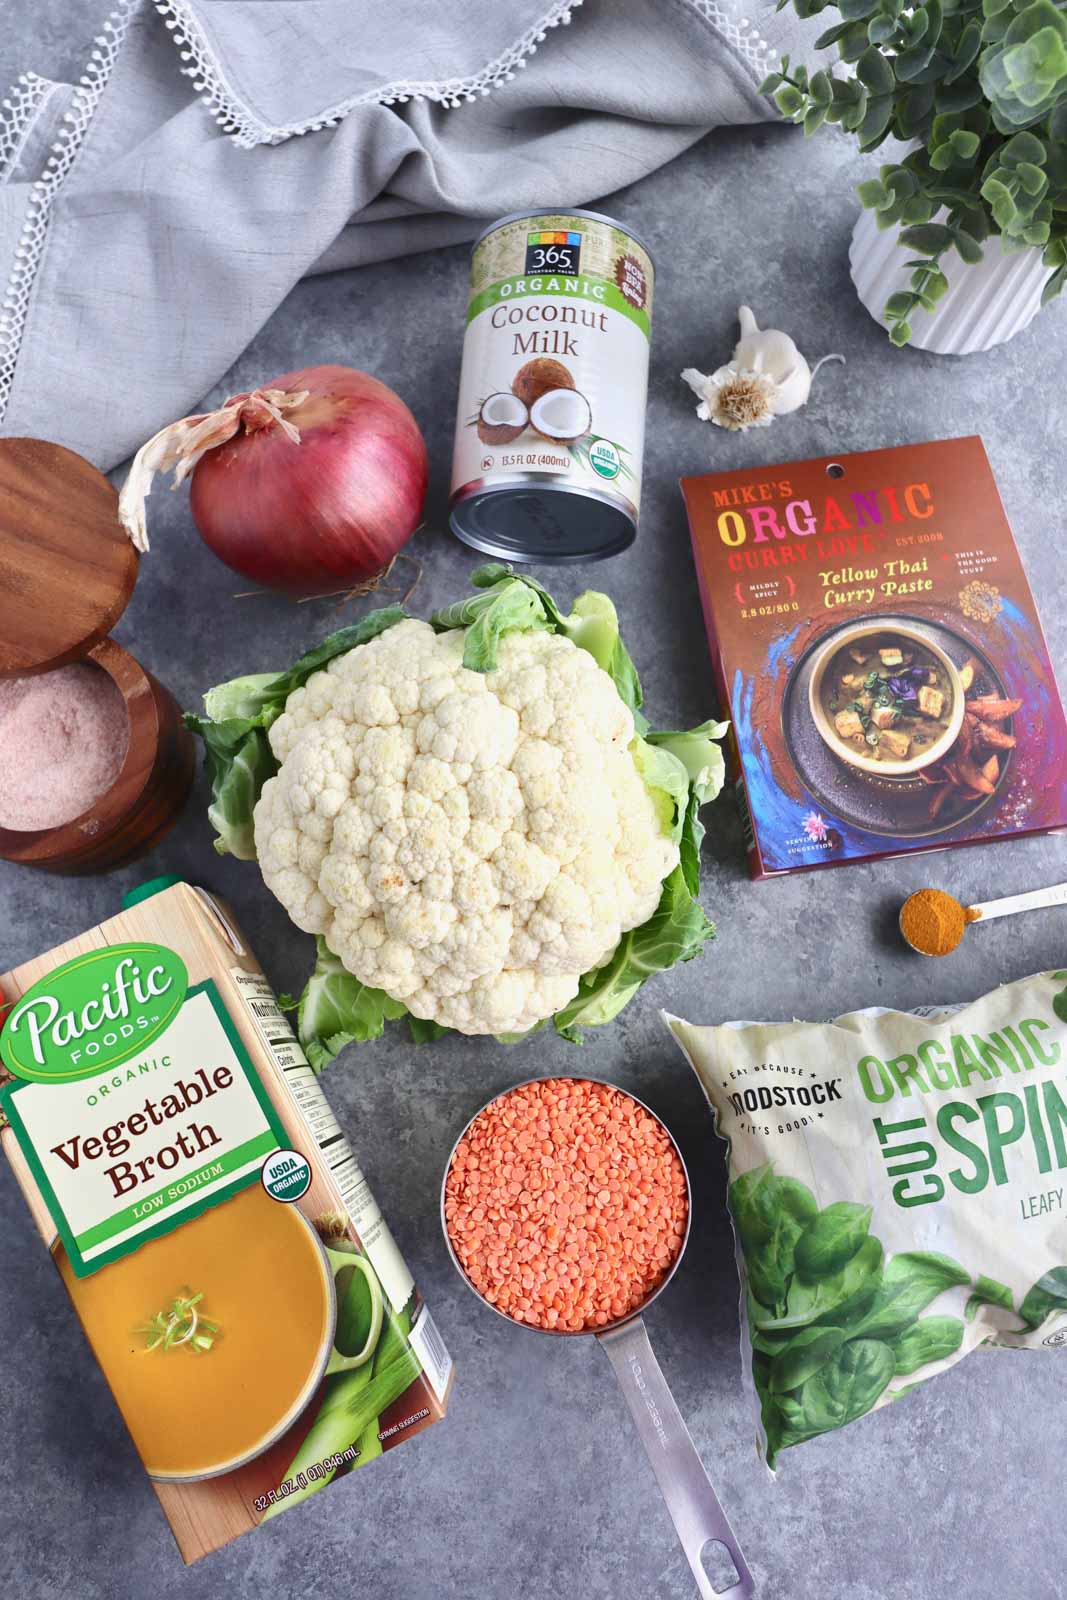 All of the ingredients needed to make vegan cauliflower lentil curry.